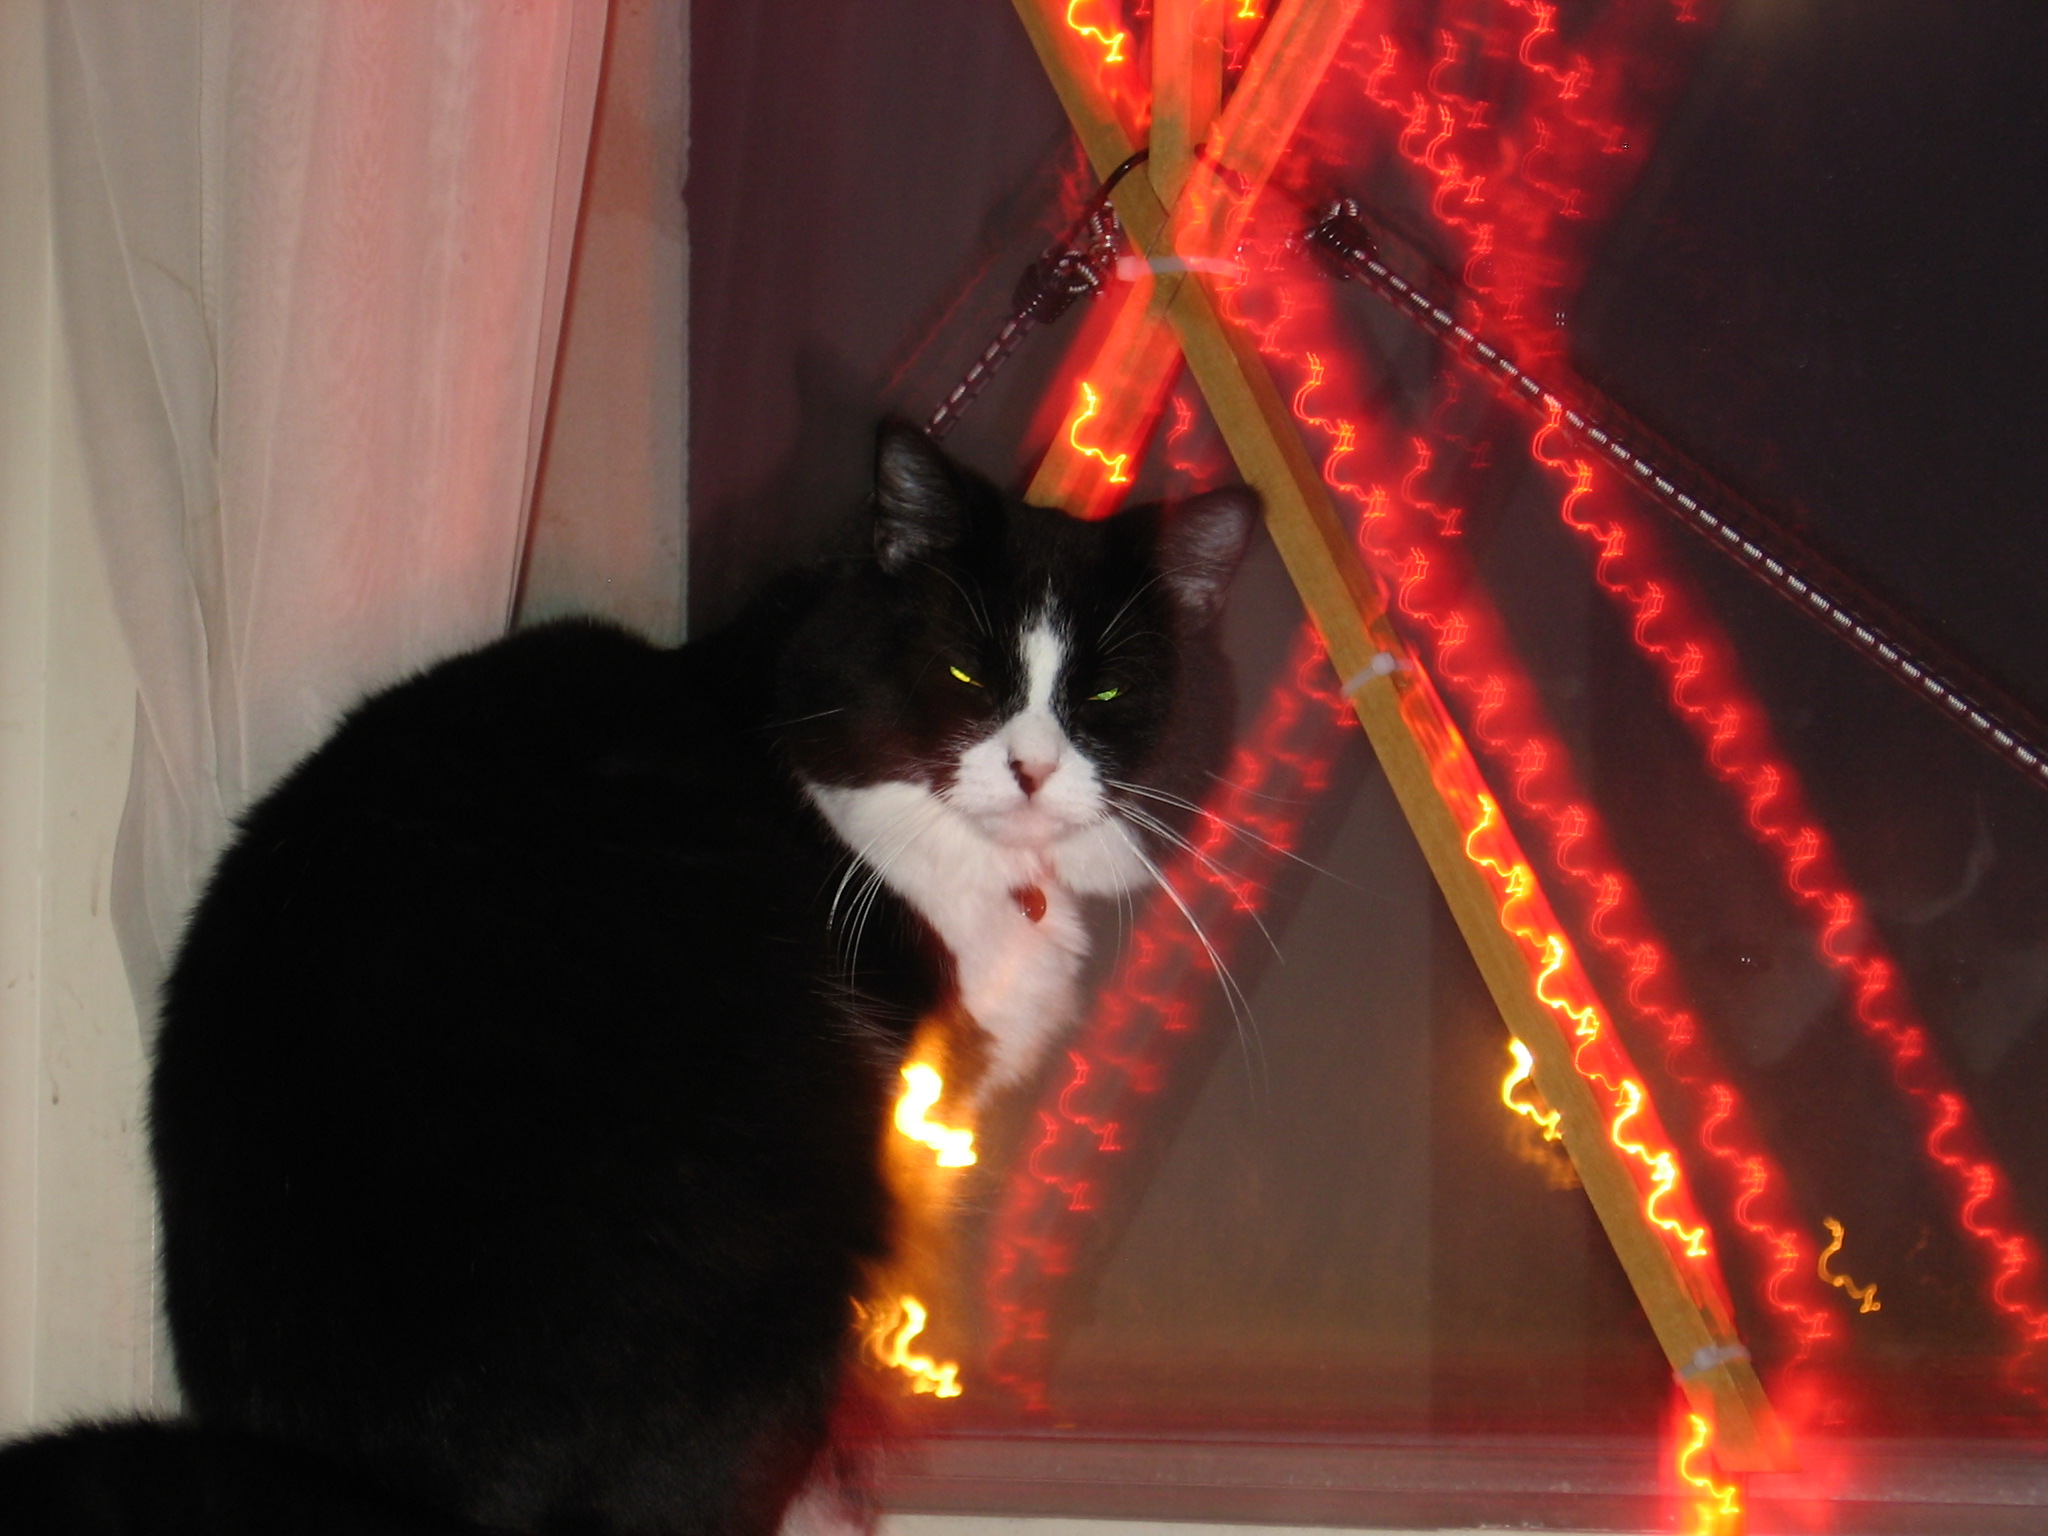 Nikita standing in front of the neon blair witch sign that Kabutroid had made.